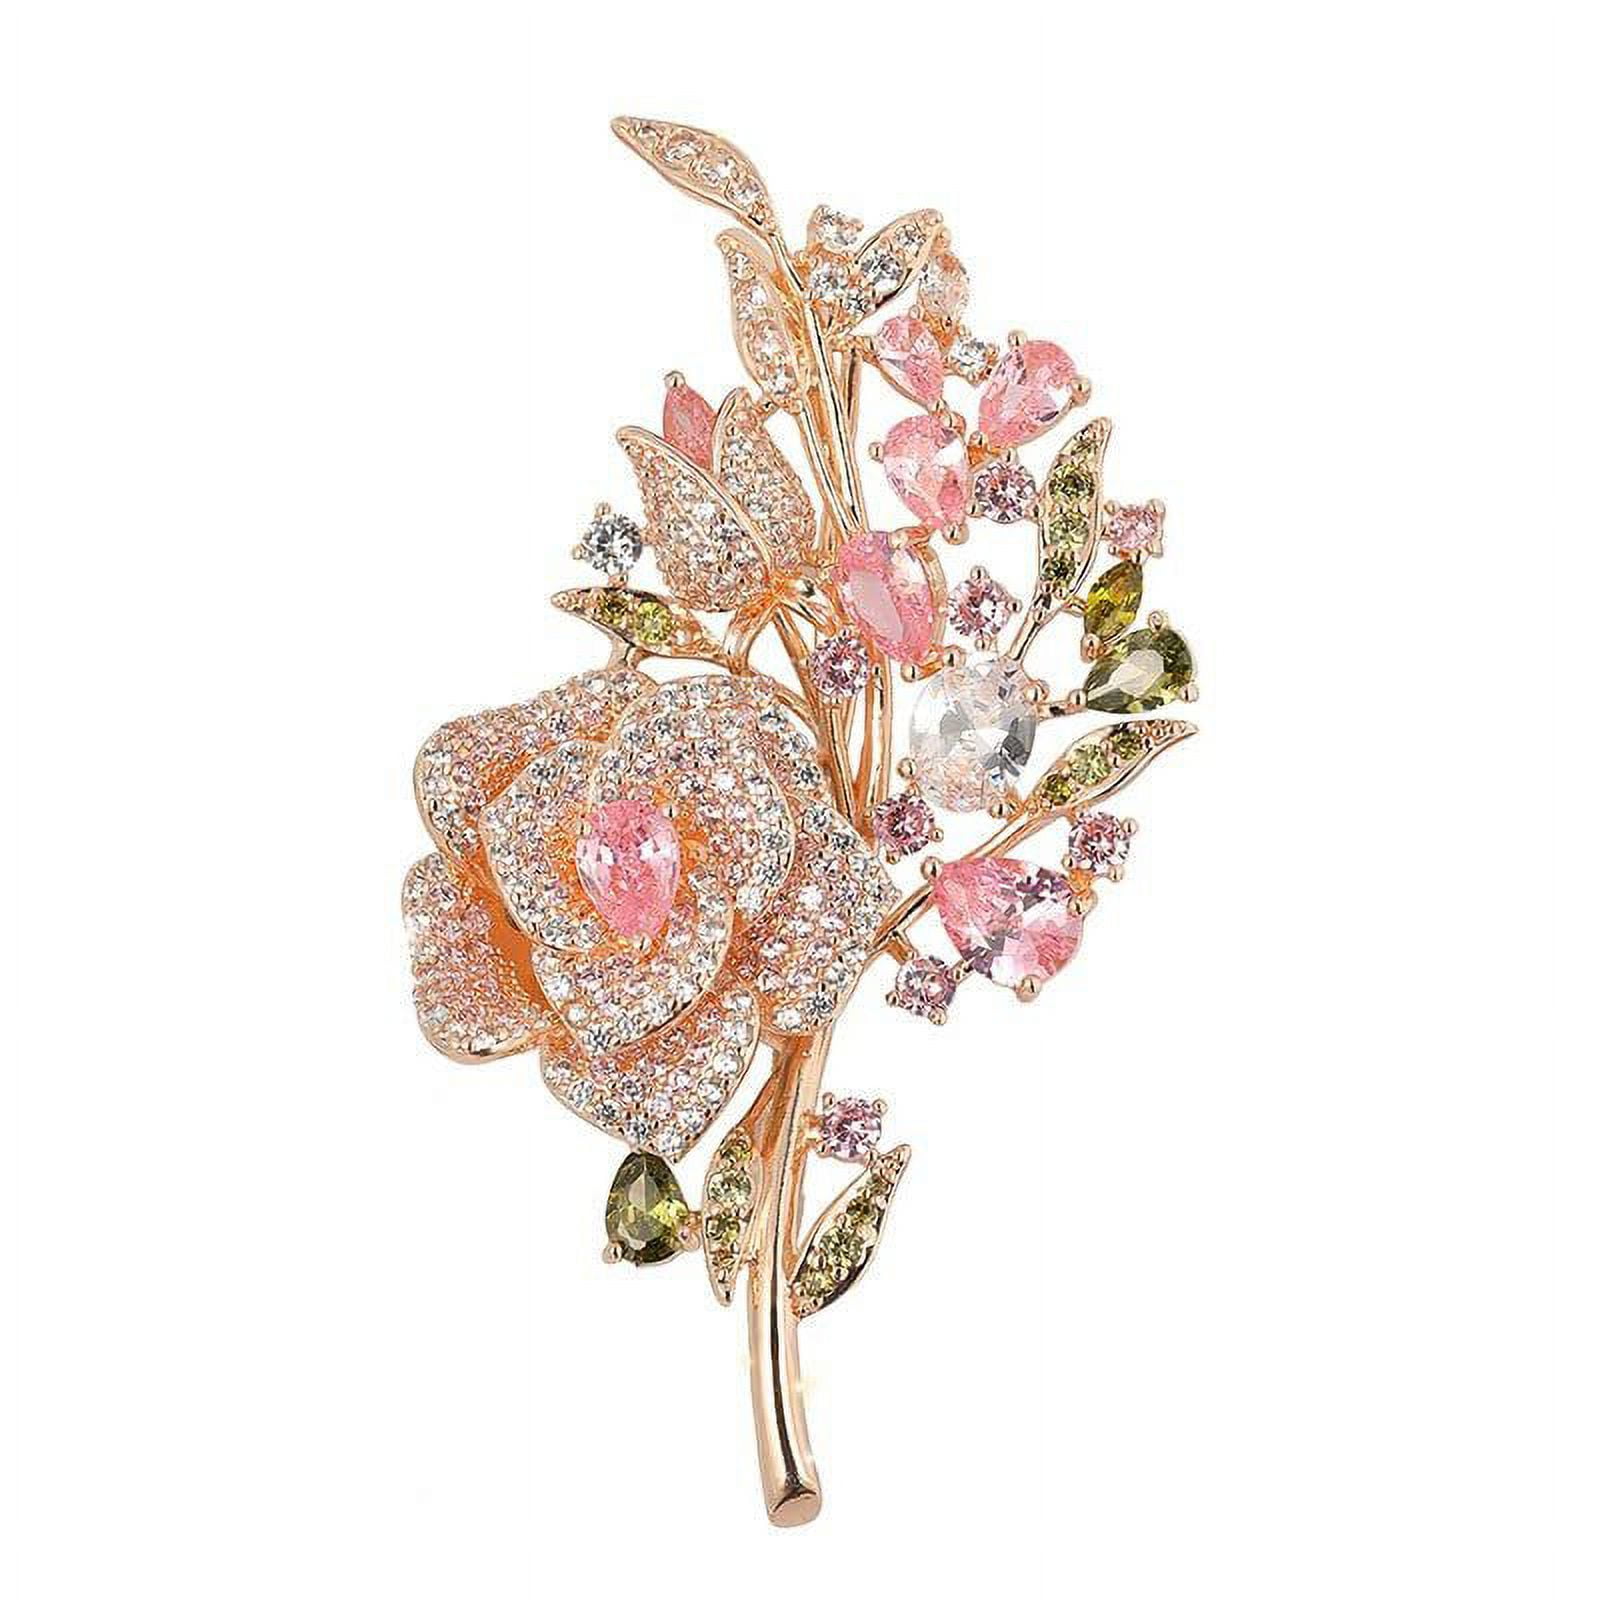 TBGFPO 2021 Lady Pins and Brooch Vintage Crystal Rhinestone Brooches Pin  Brooch Pins Pearl Broche for Women (Color : 7)